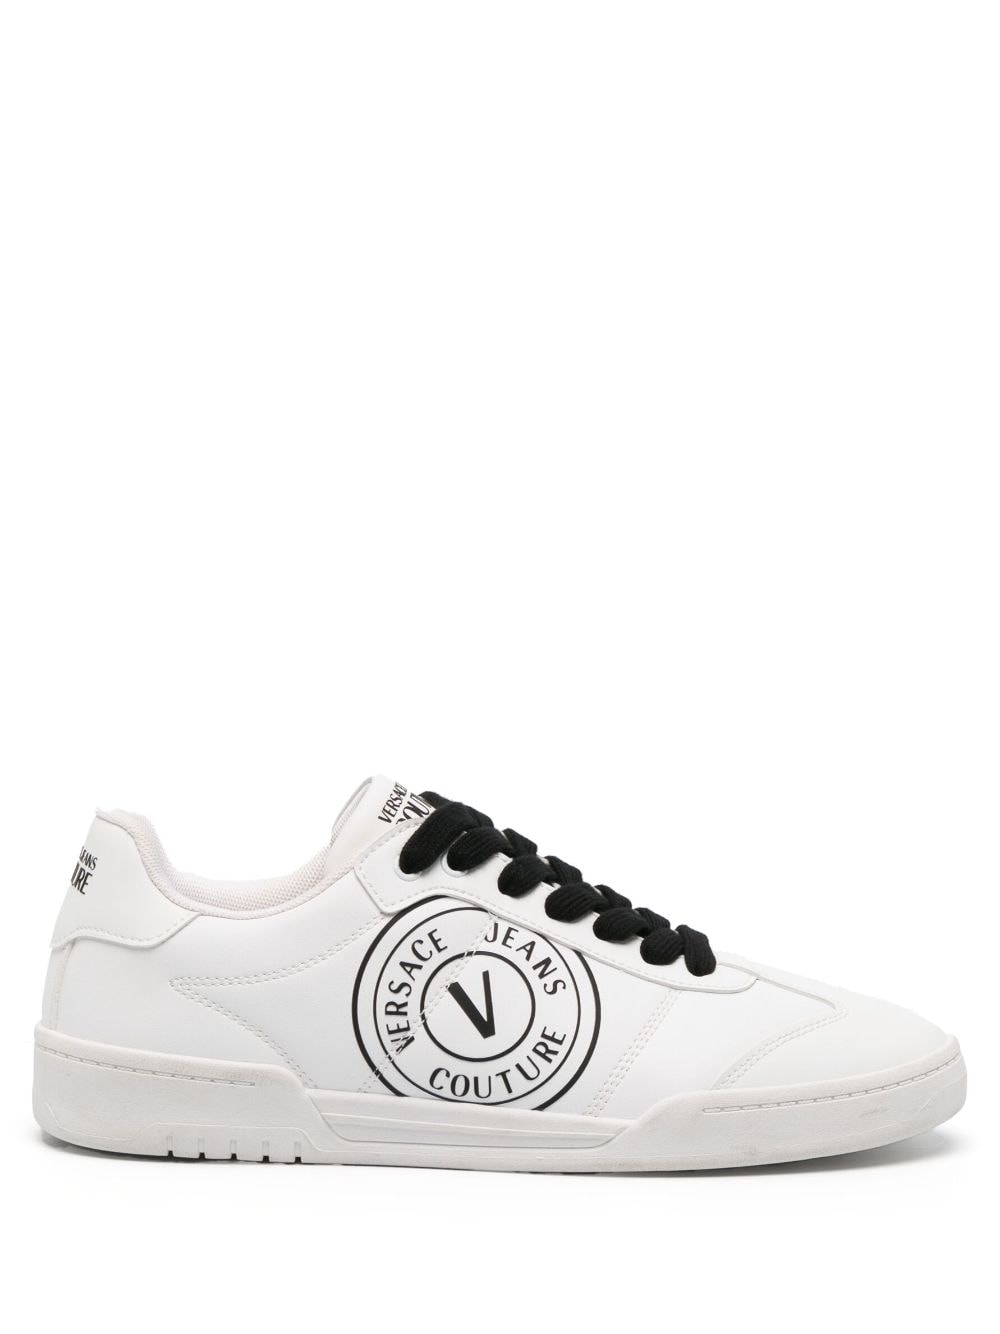 Versace Jeans Couture Brooklyn V-Emblem sneakers - White von Versace Jeans Couture